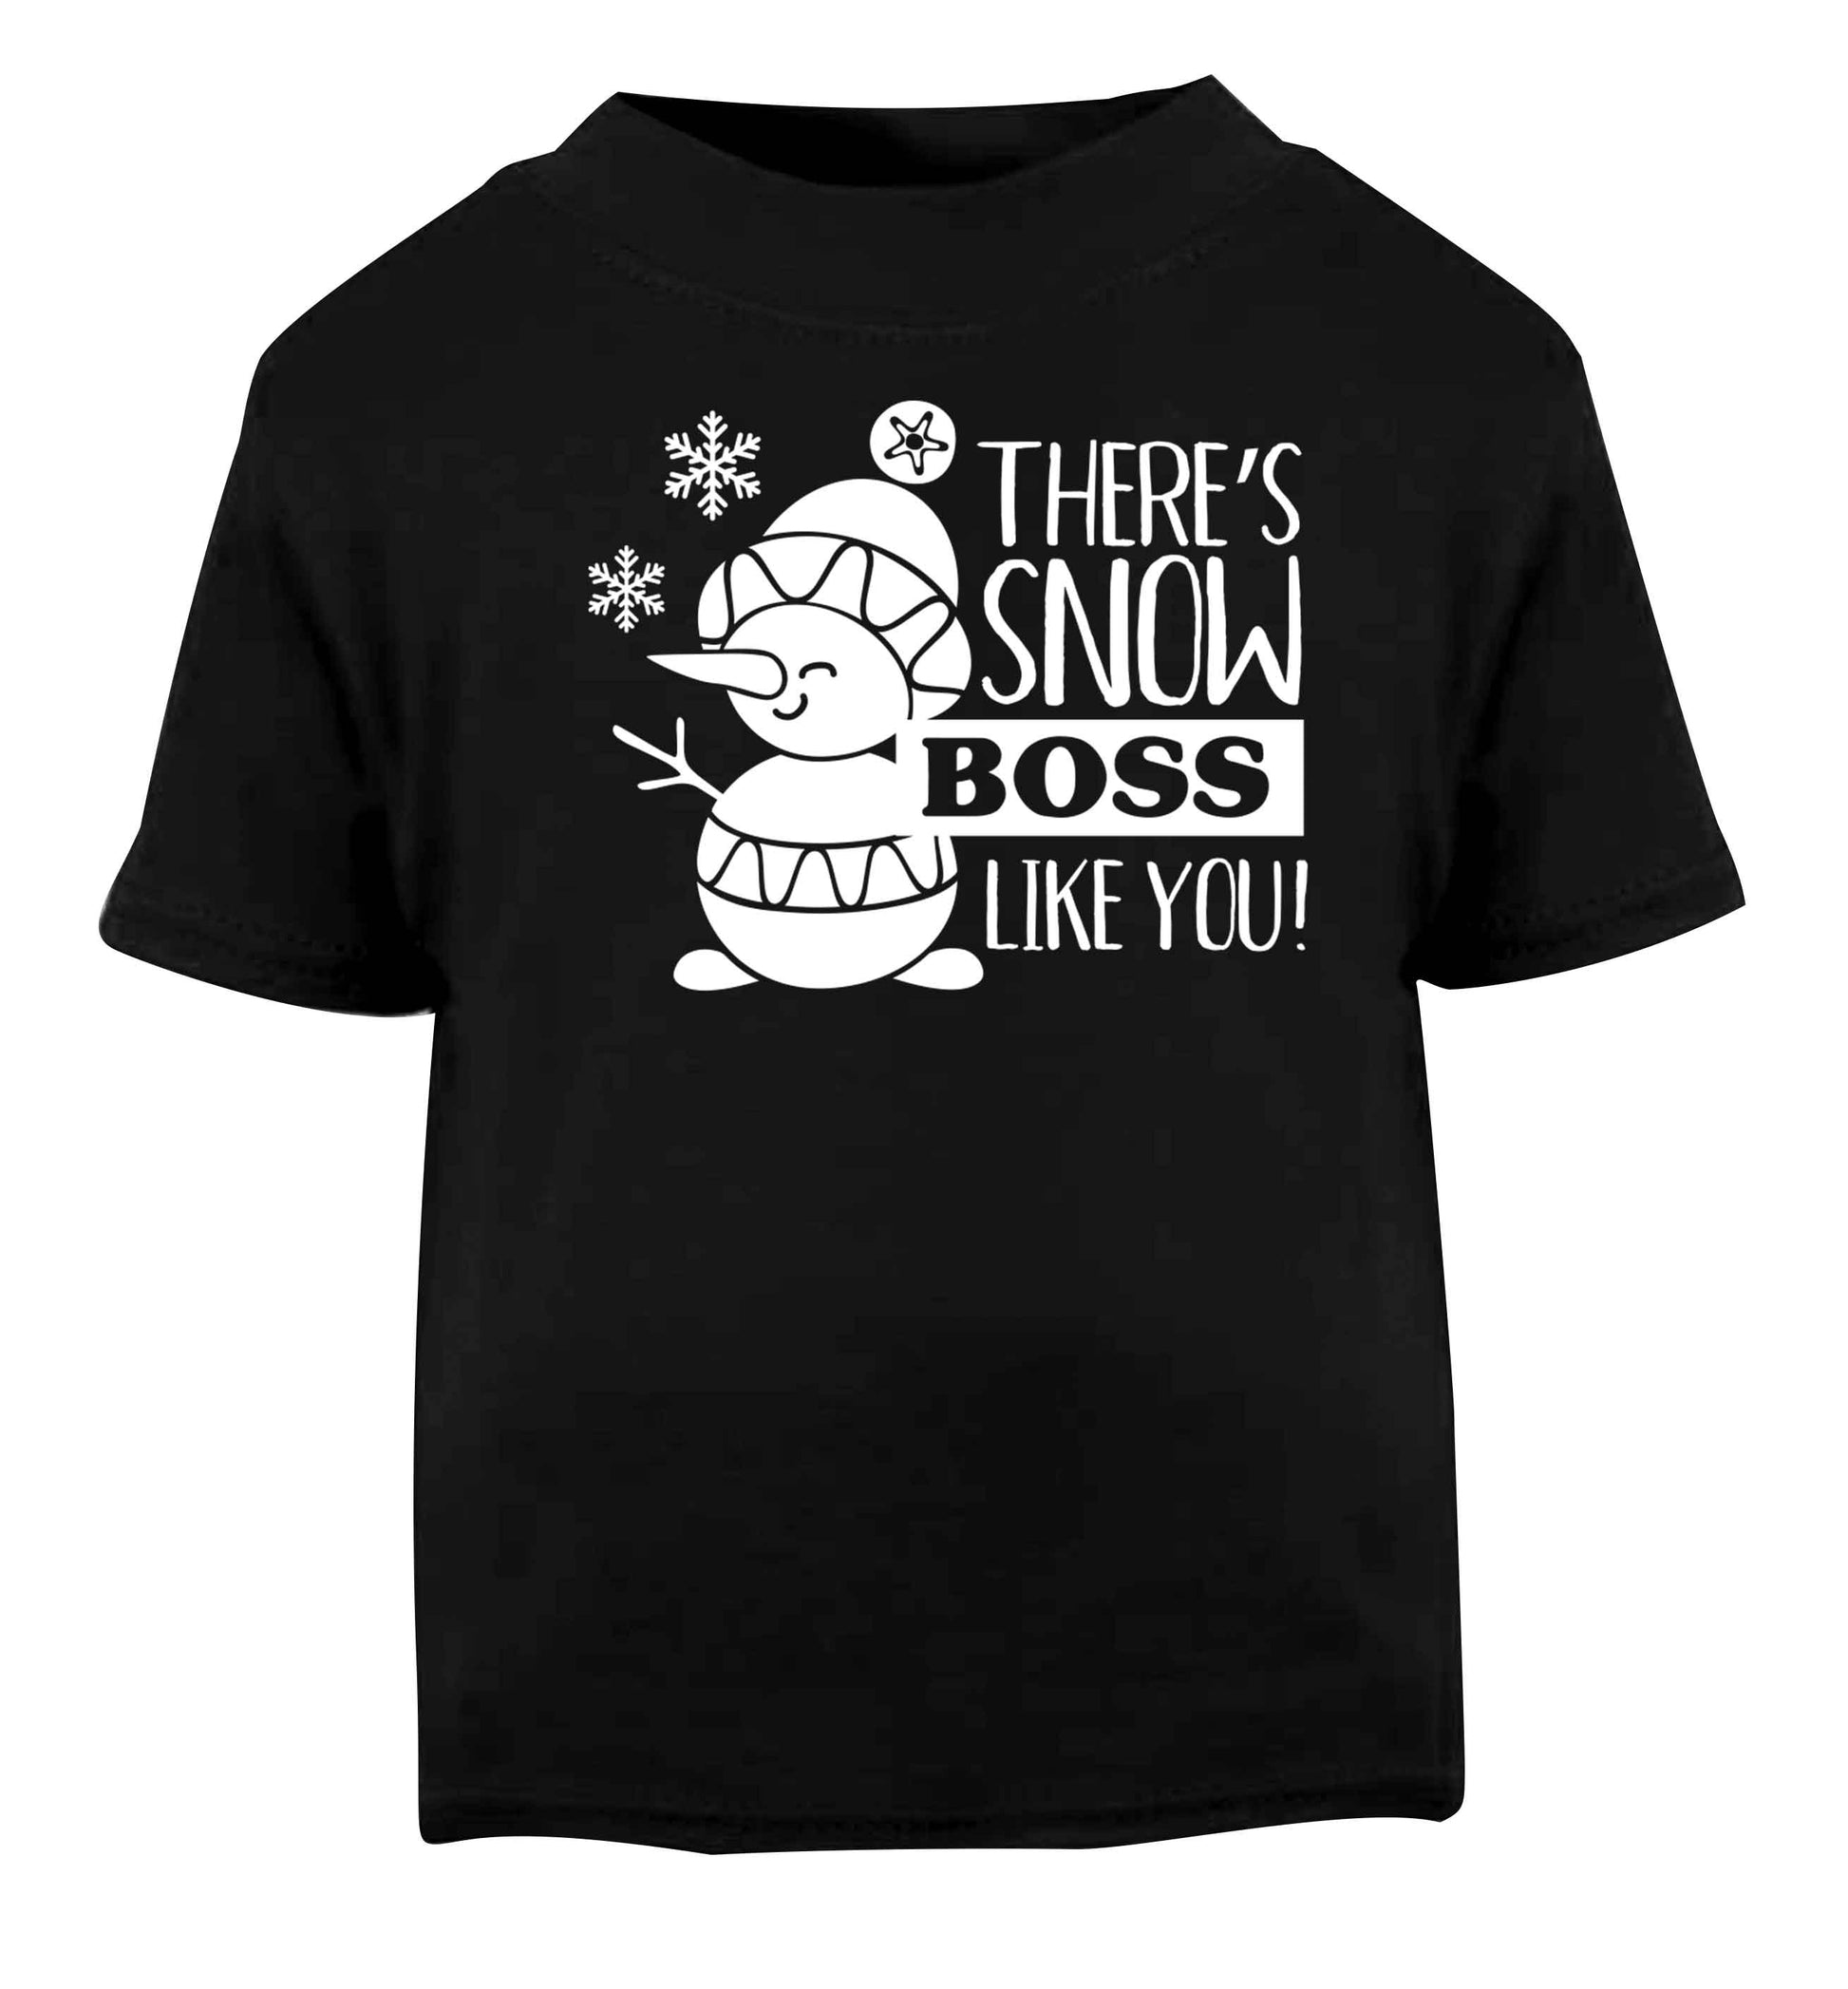 There's snow boss like you Black baby toddler Tshirt 2 years